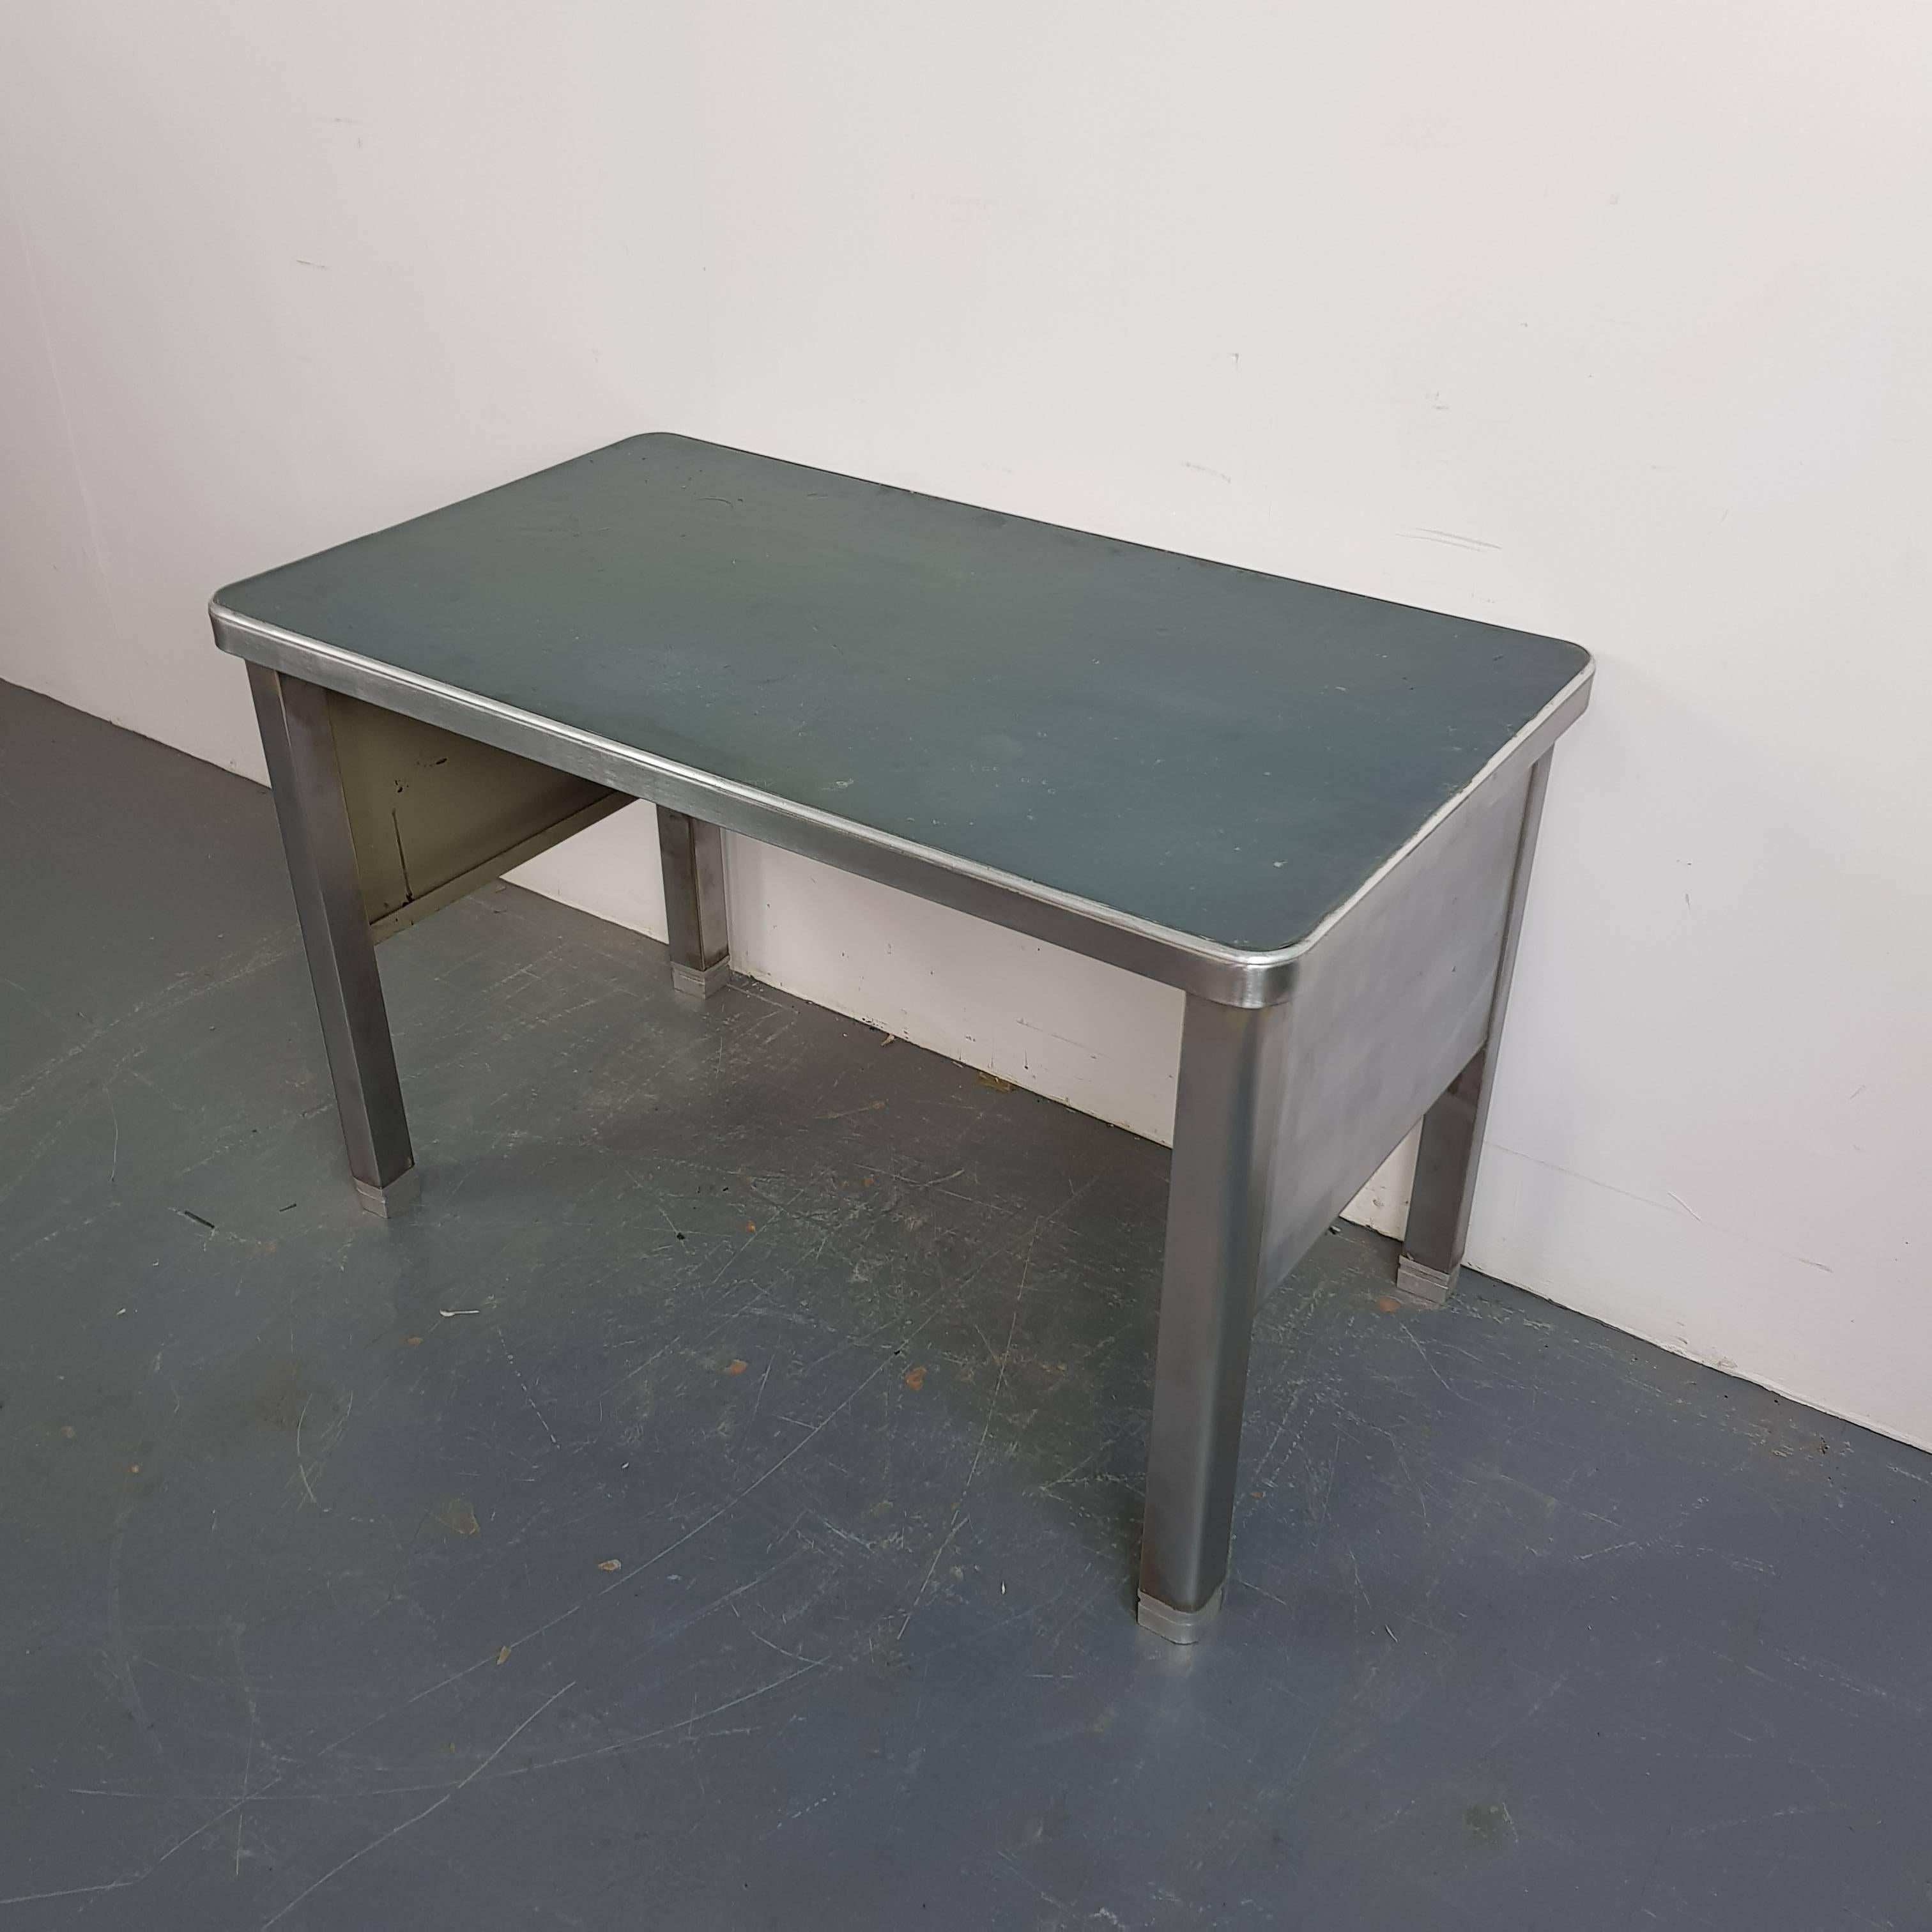 Vintage Industrial Stripped and Polished Steel Desk from 1960 In Good Condition For Sale In Lewes, East Sussex